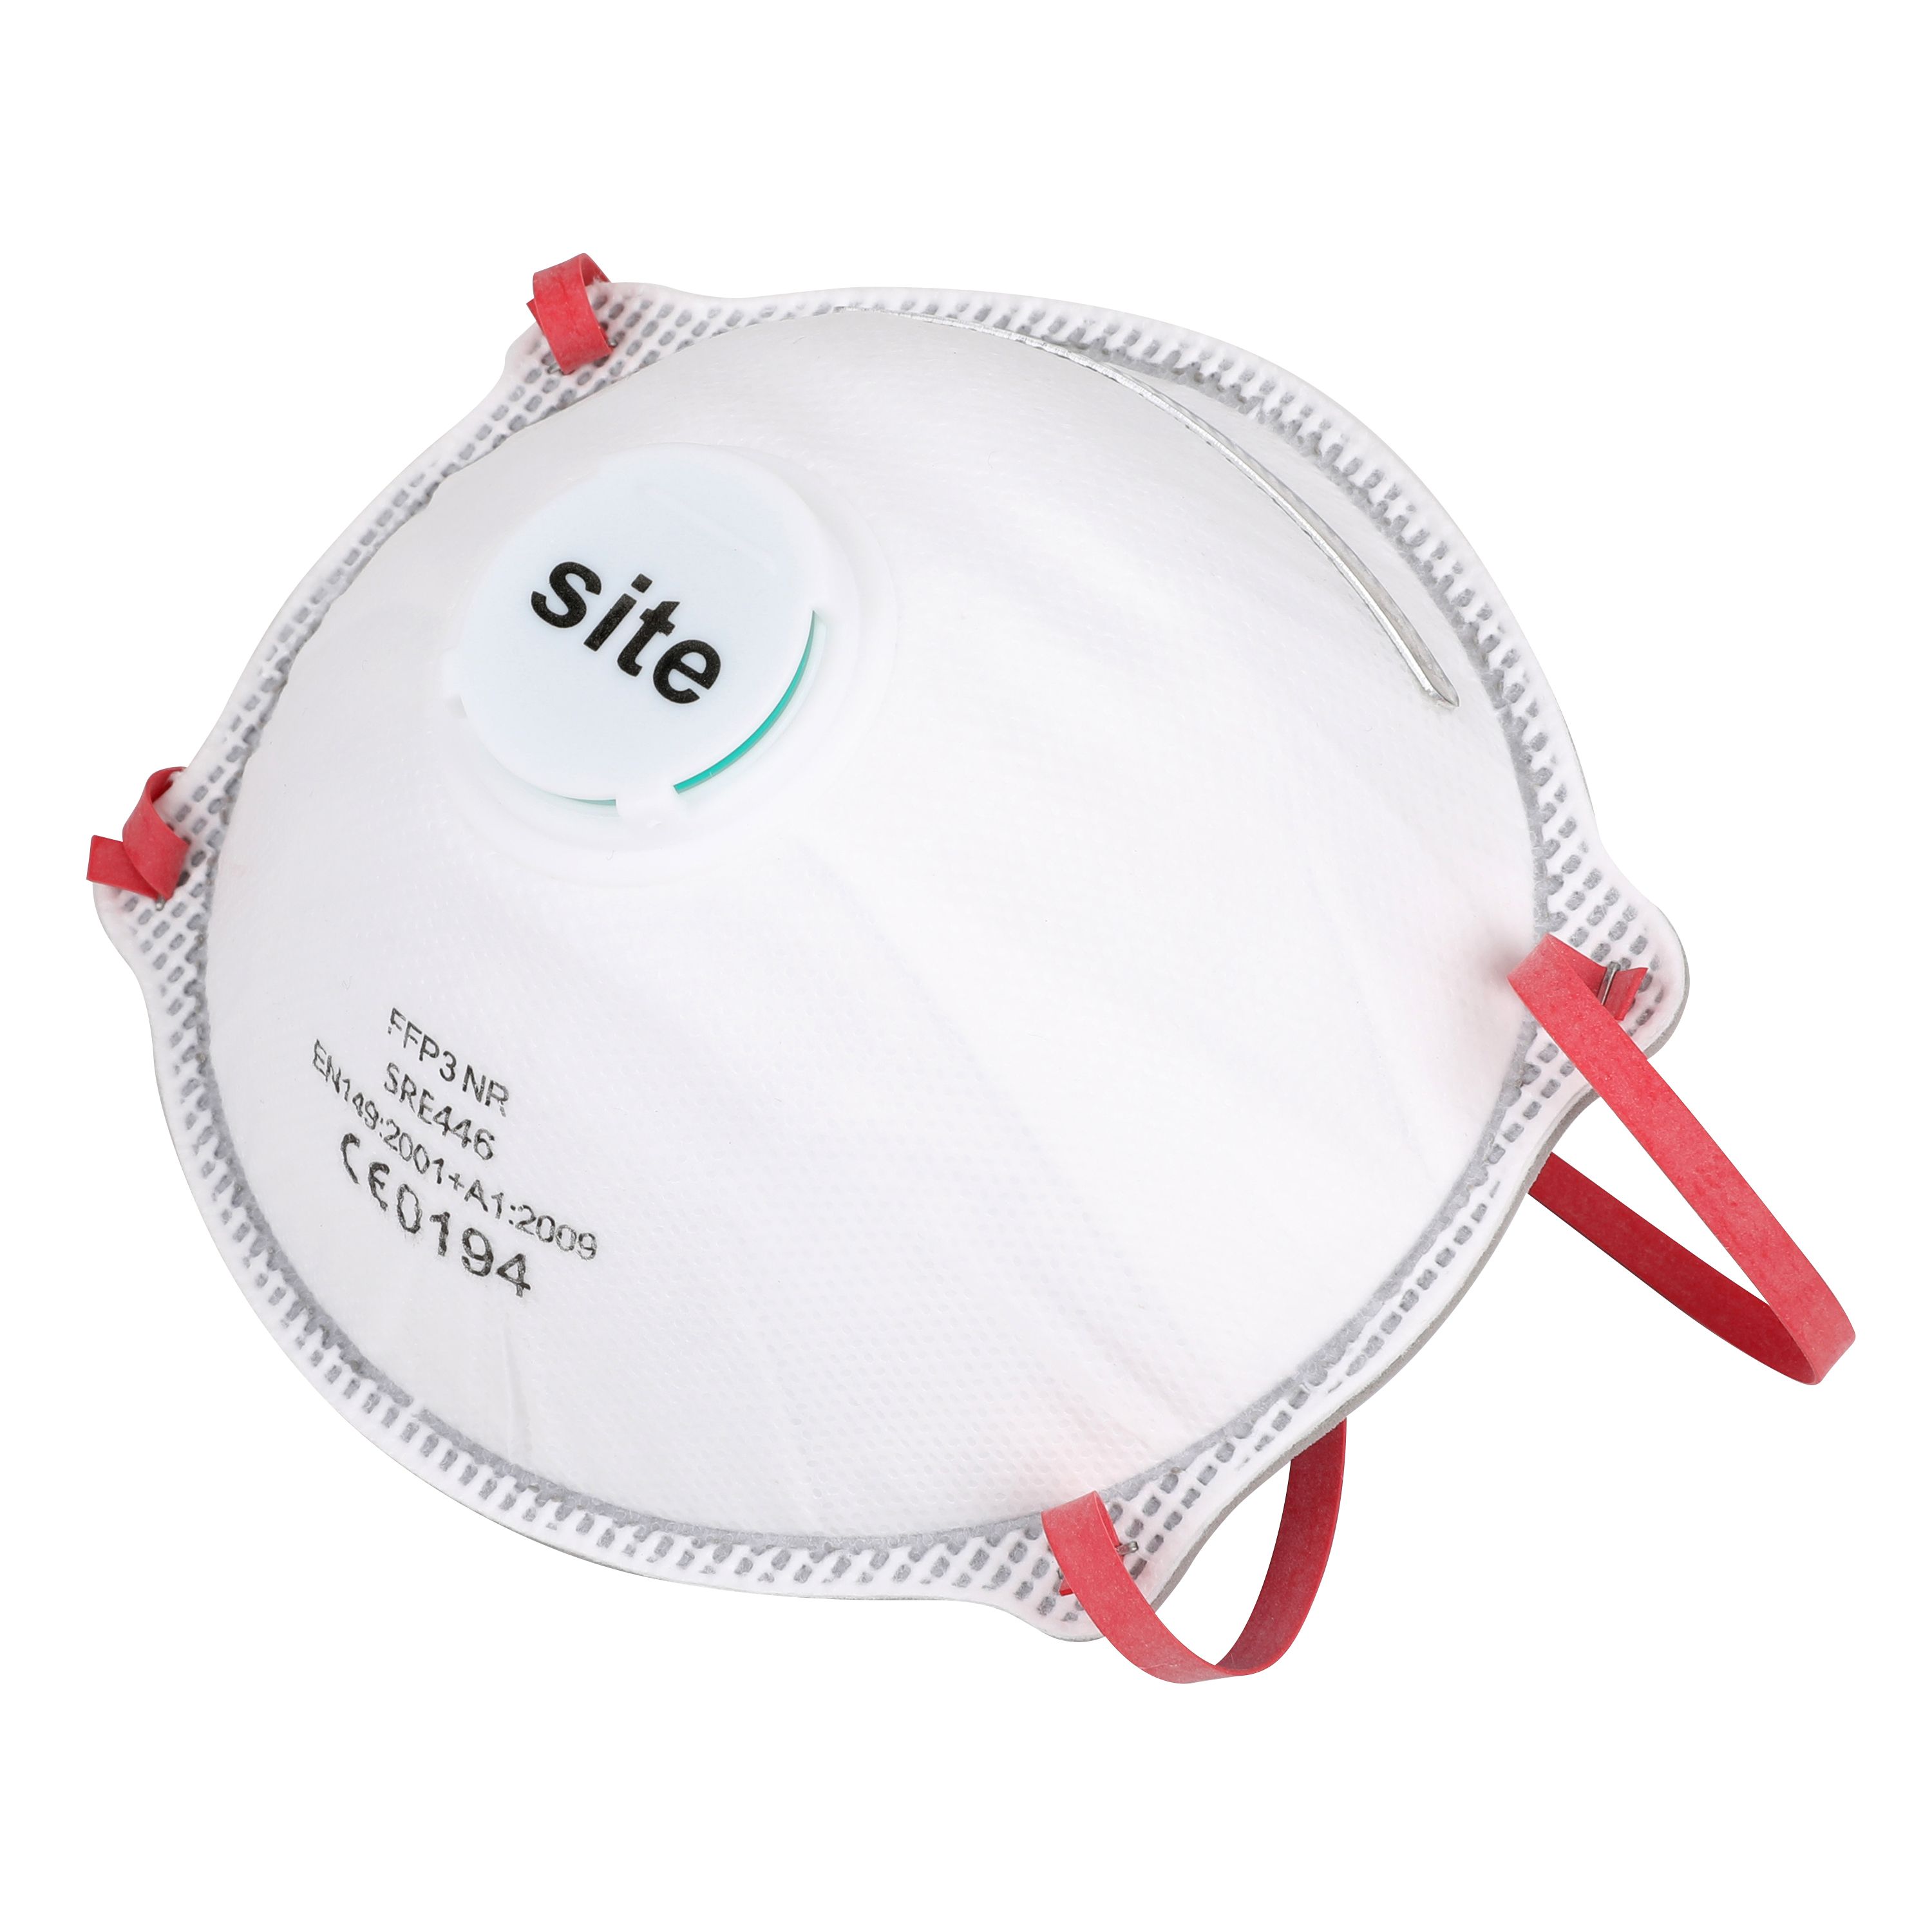 Site P3 Valved Disposable dust mask SRE446, Pack of 2